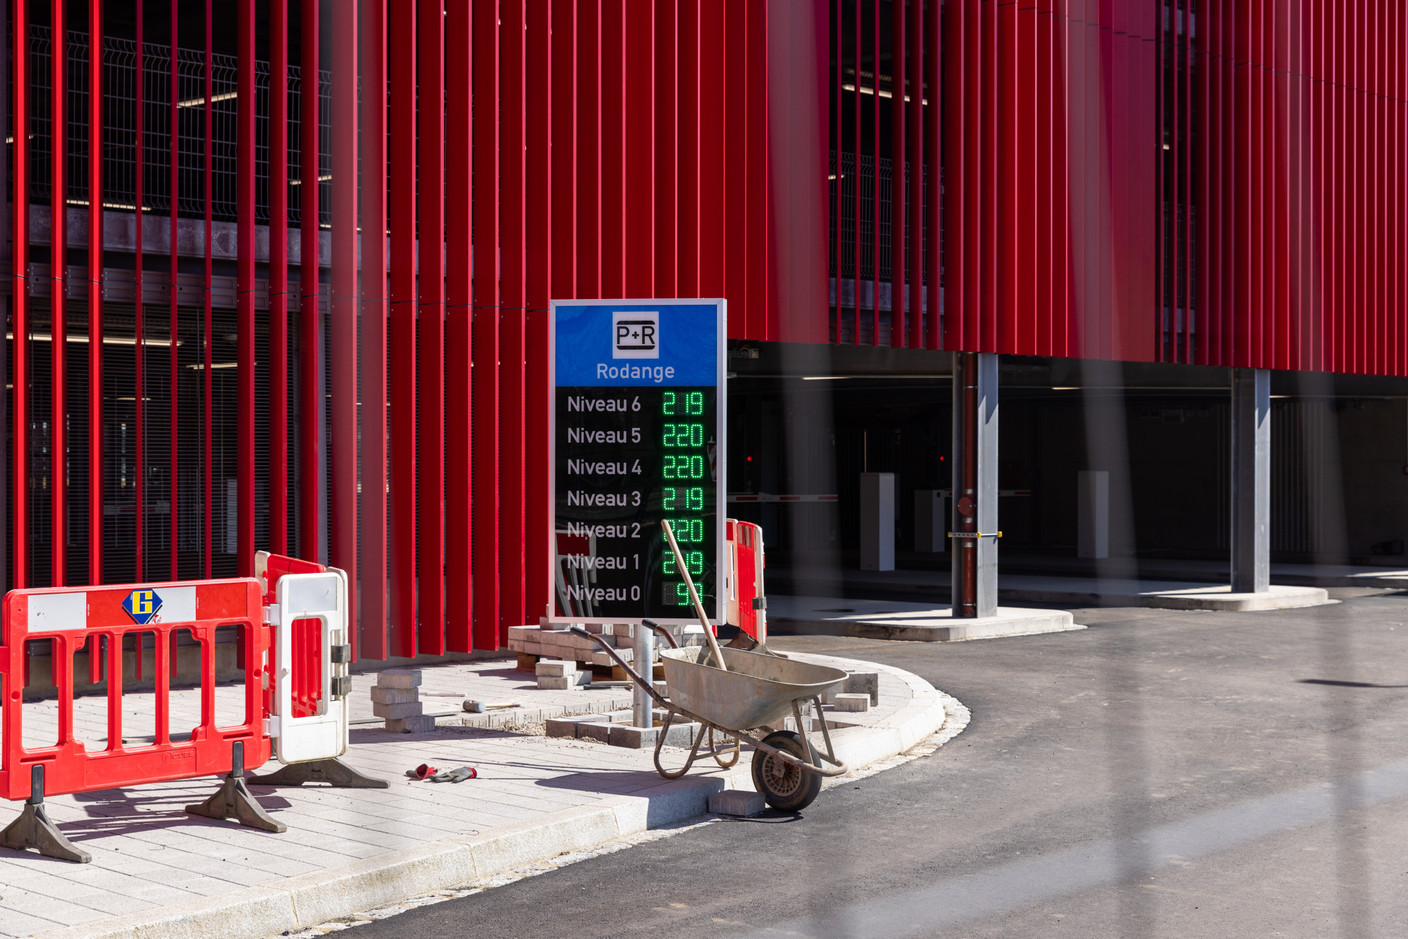 Work is not quite finished at the P+R in Rodange. Photo: Romain Gamba/Maison Moderne